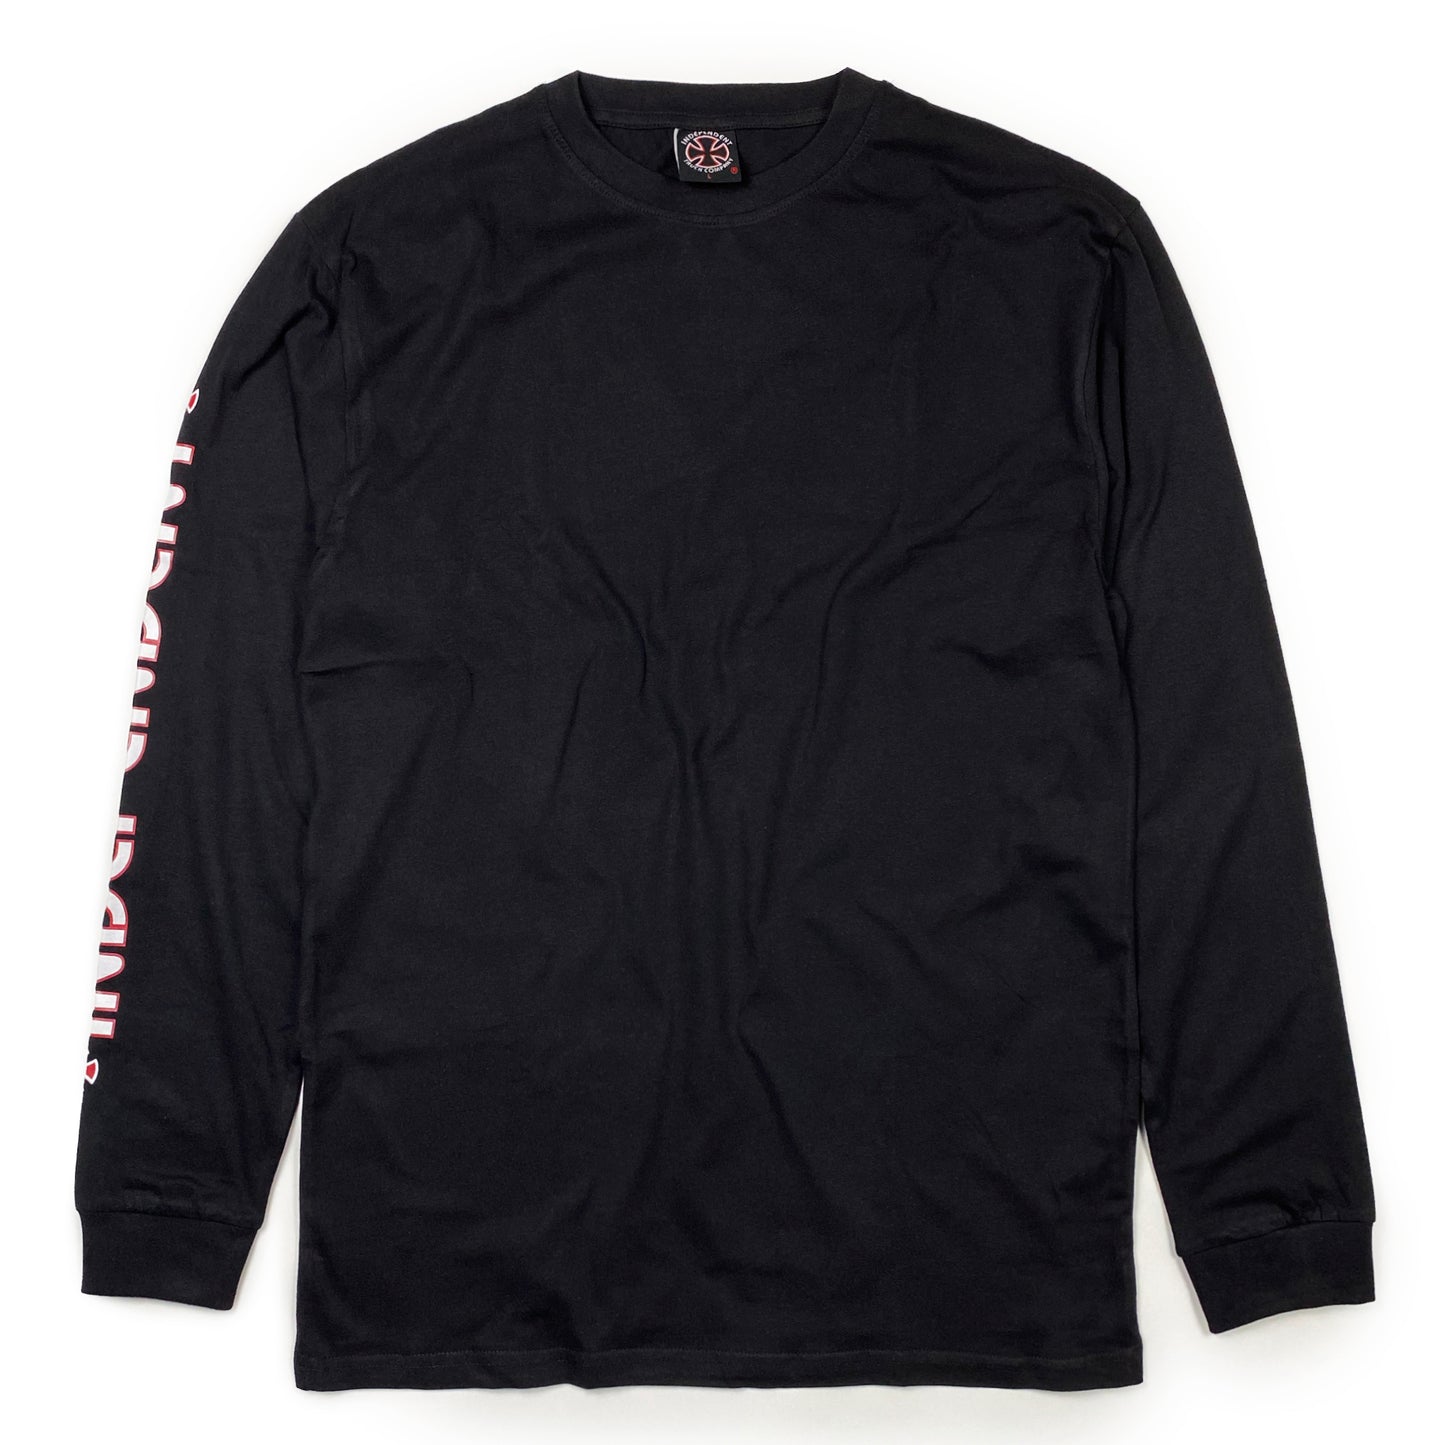 Independent Bar Cross Long Sleeve T - Black - Prime Delux Store